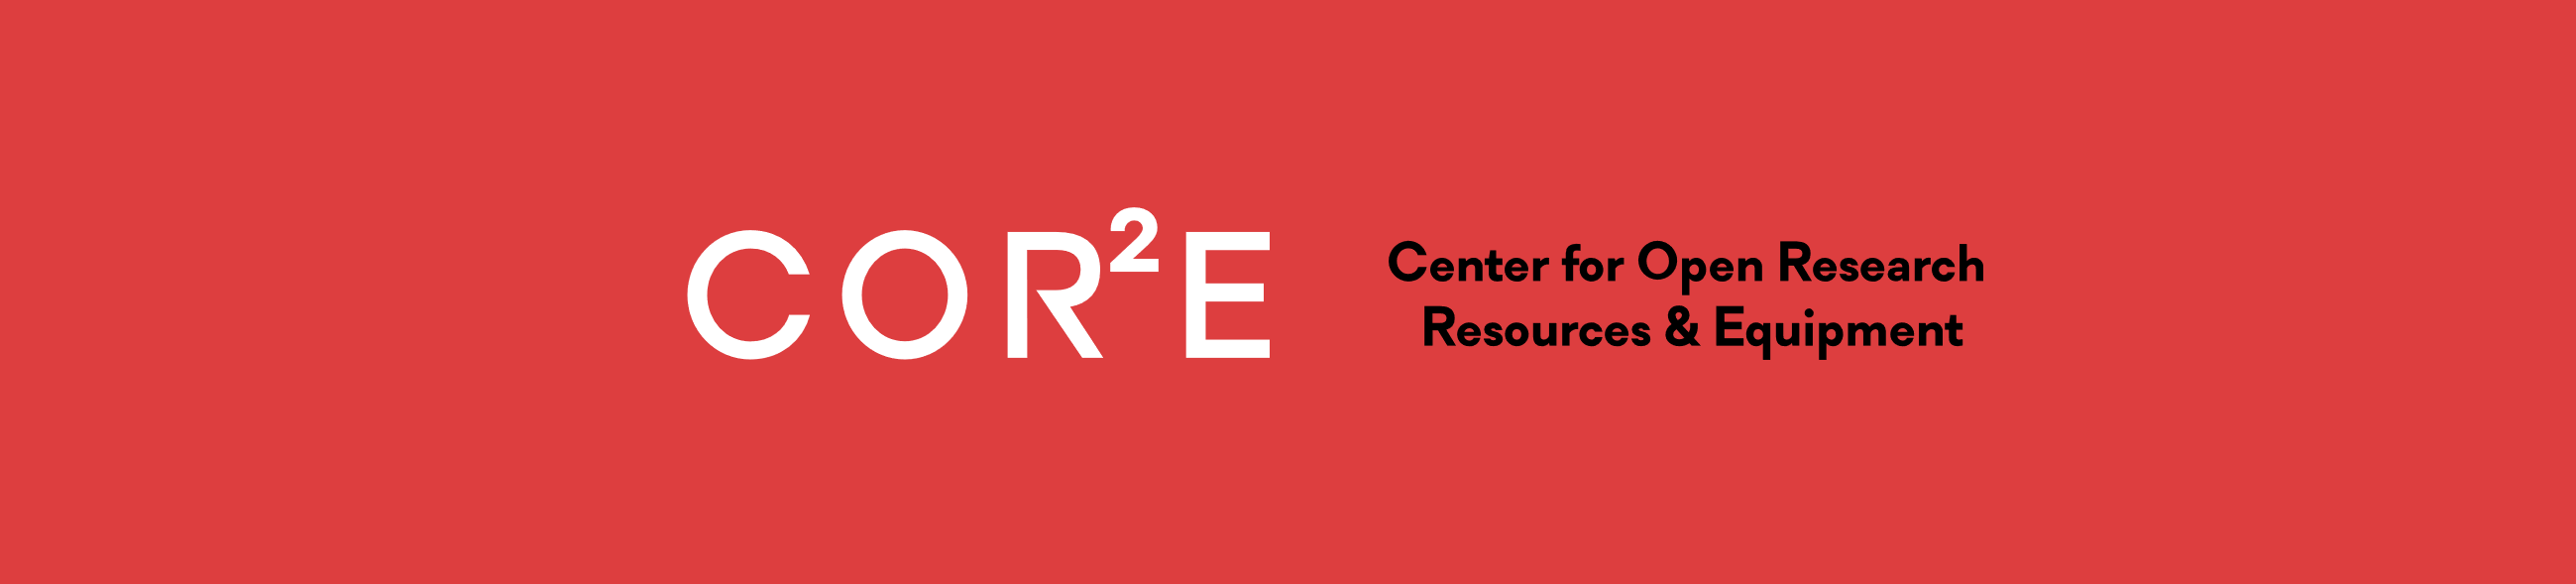 Center for Open Research Resources & Equipment